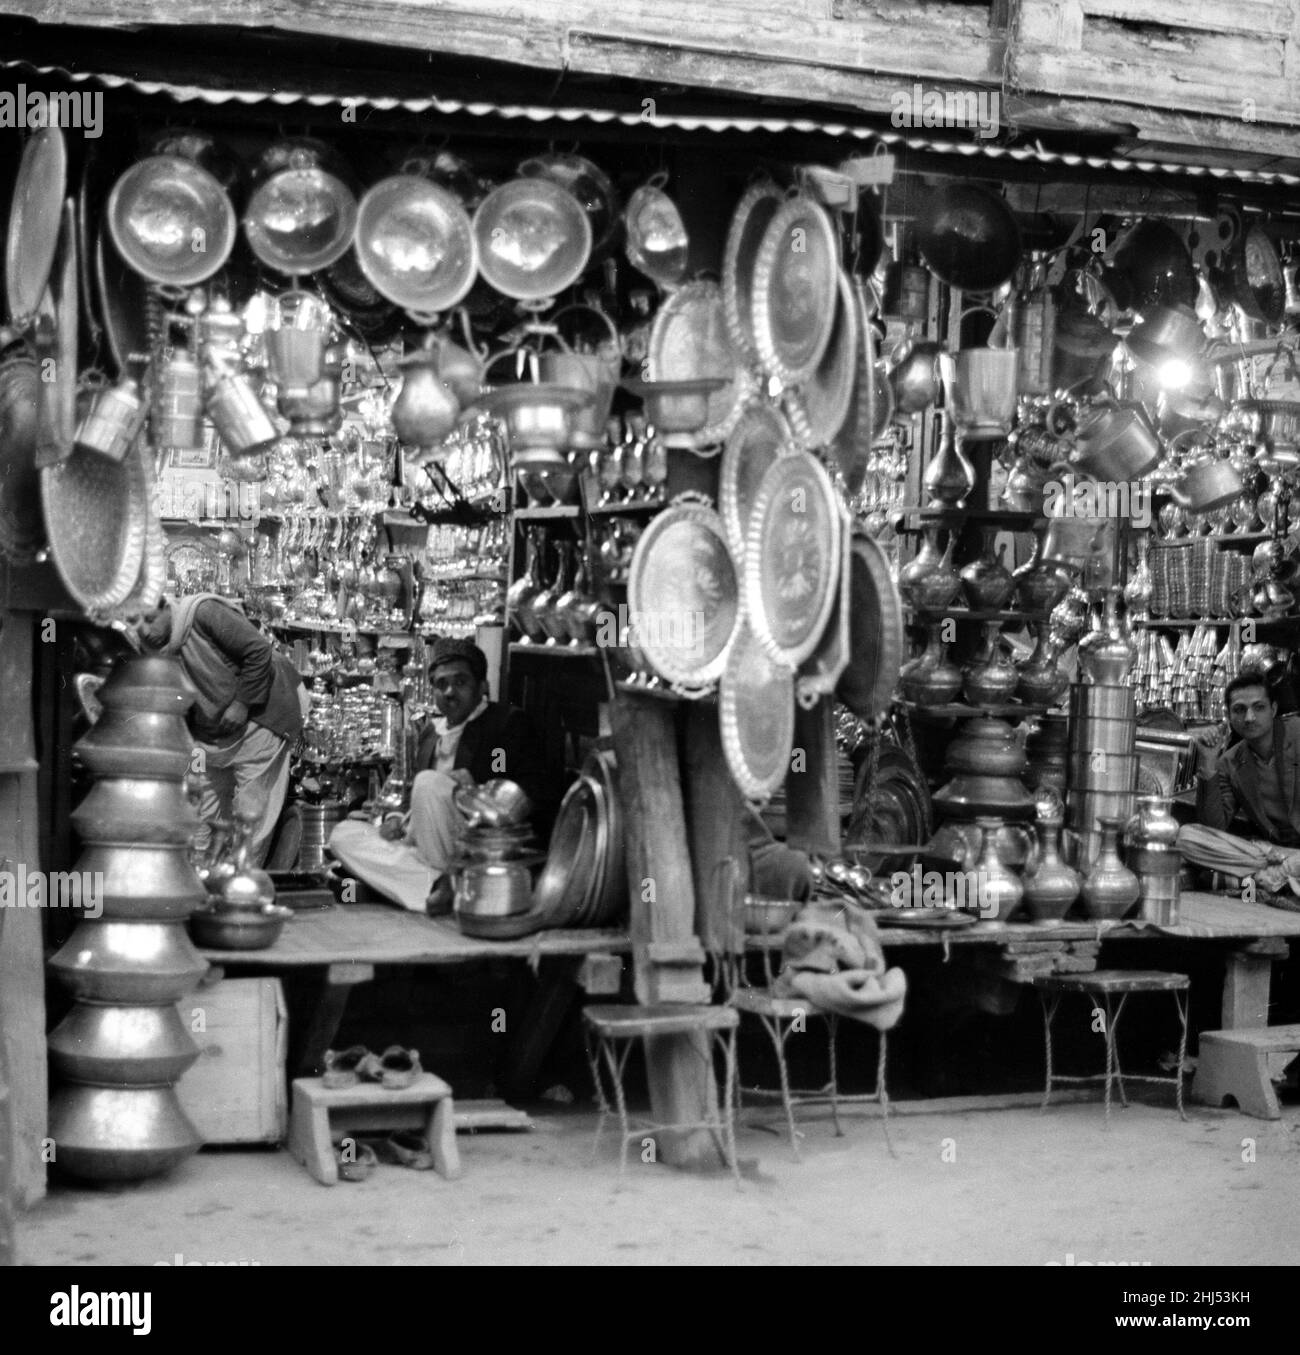 Traders Ironmongers sit inside their shops in Peshawar amongst the pots and pans. Pesthe capital of the North West Frontier province of Pakistan. February 1961 l Stock Photo